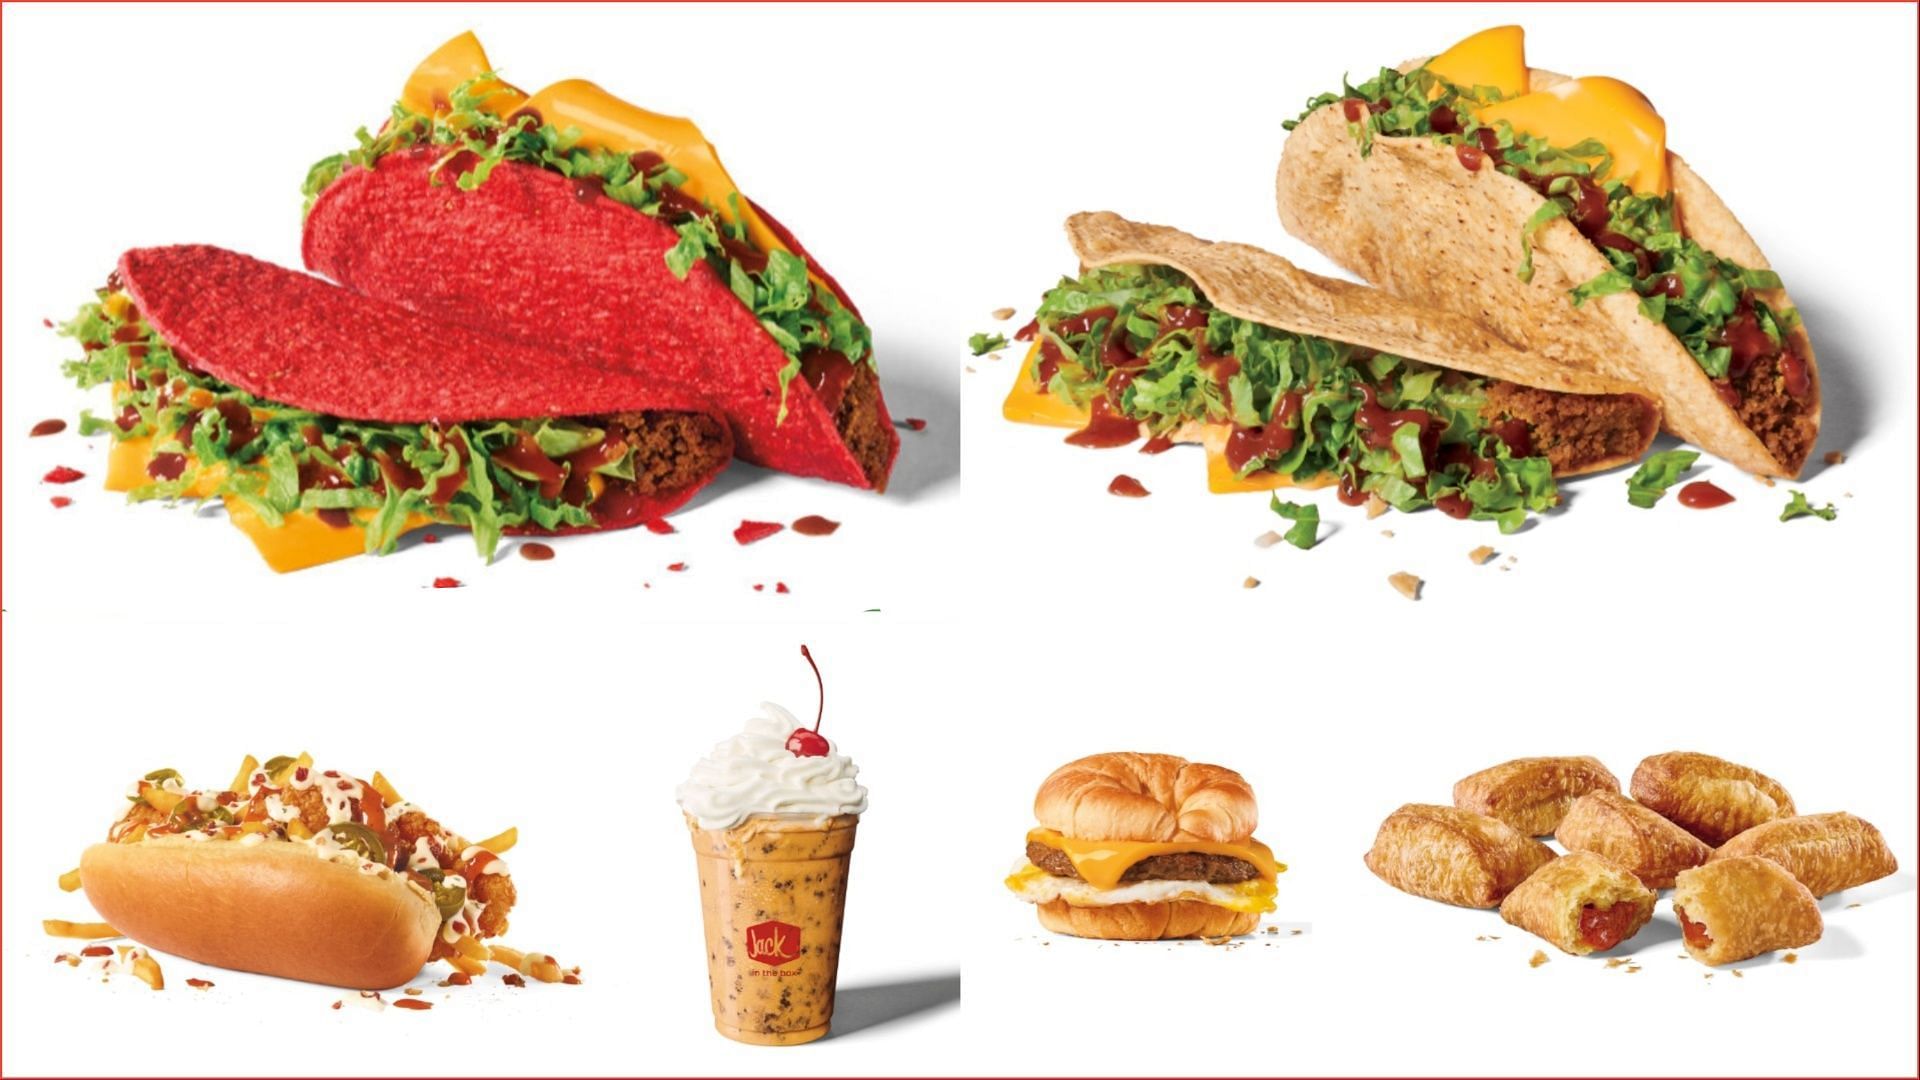 Jack In The Box Angry Monster Tacos Ingredients Availability Price And Other Details Explored 